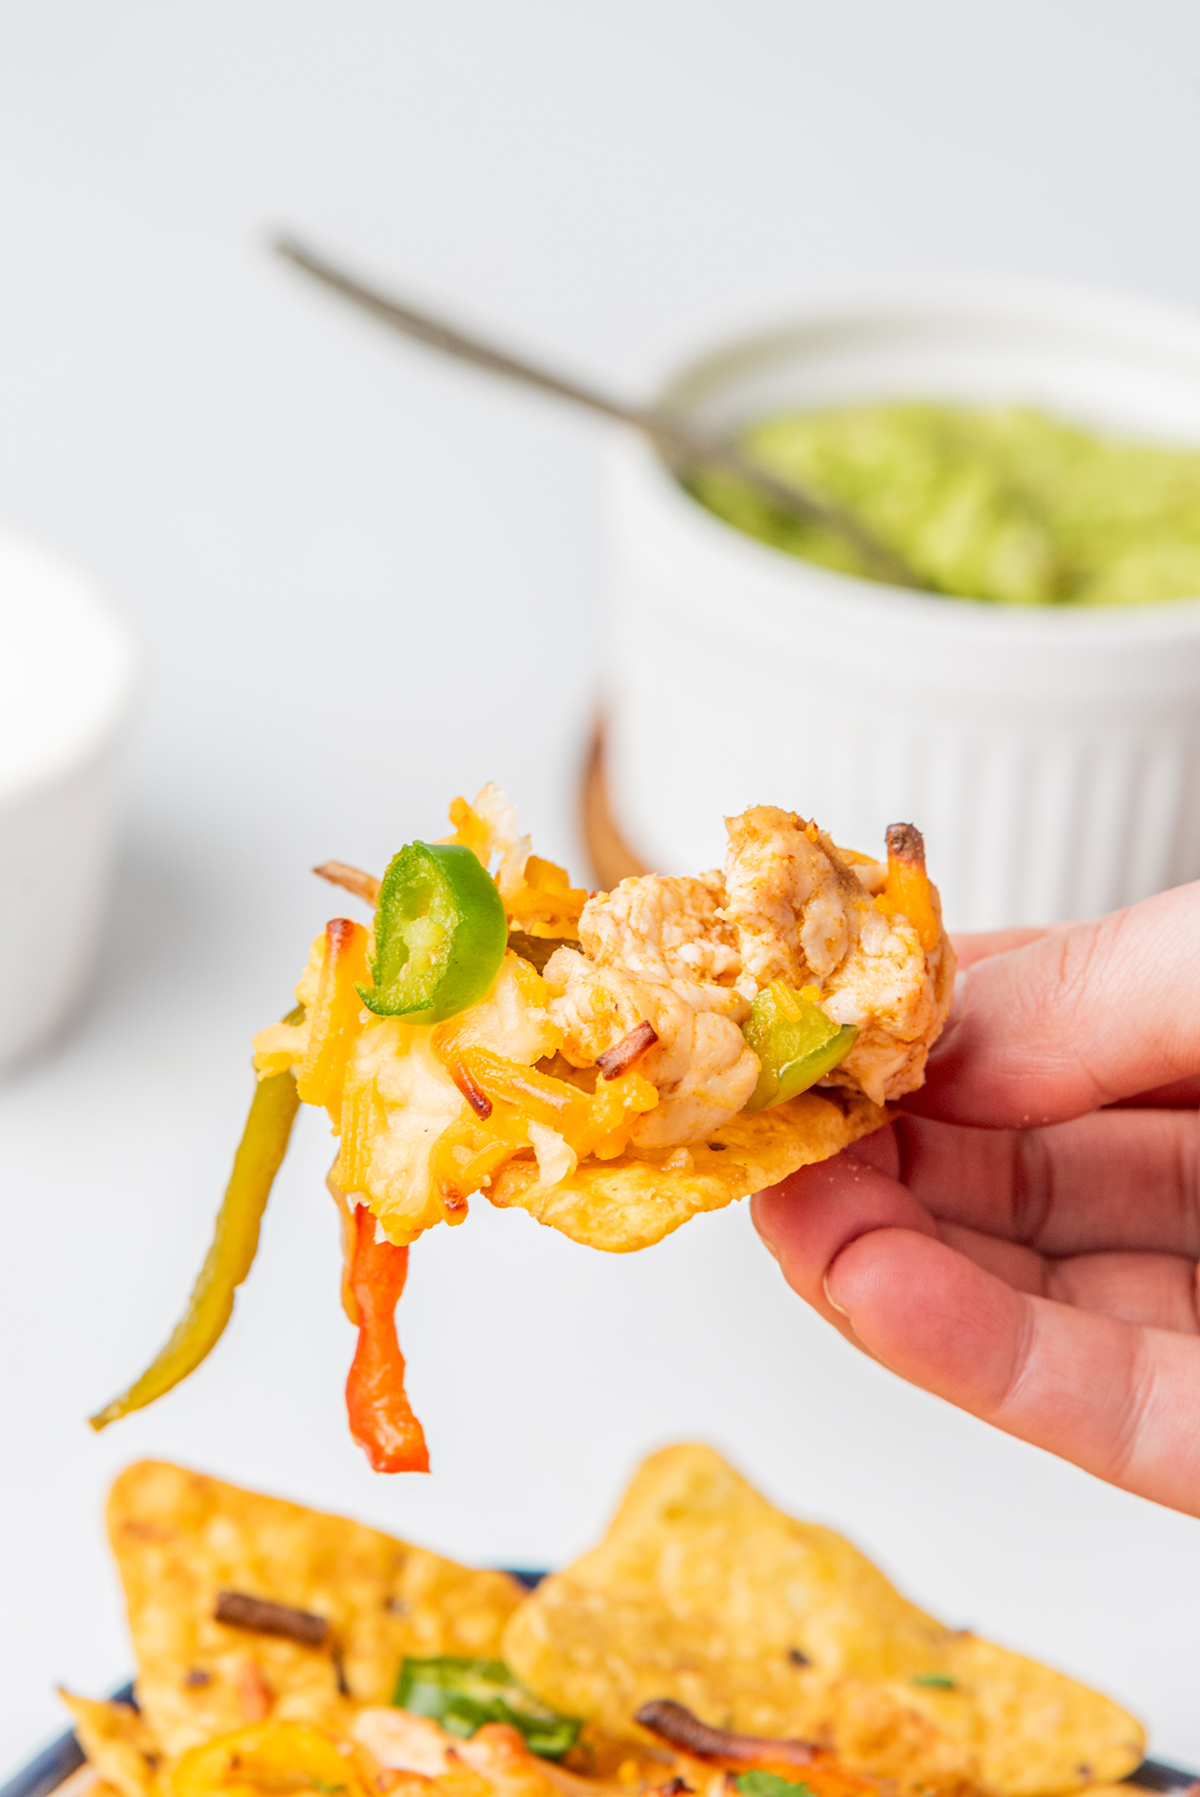 A hand holding a tortilla chip with chicken nacho toppings.